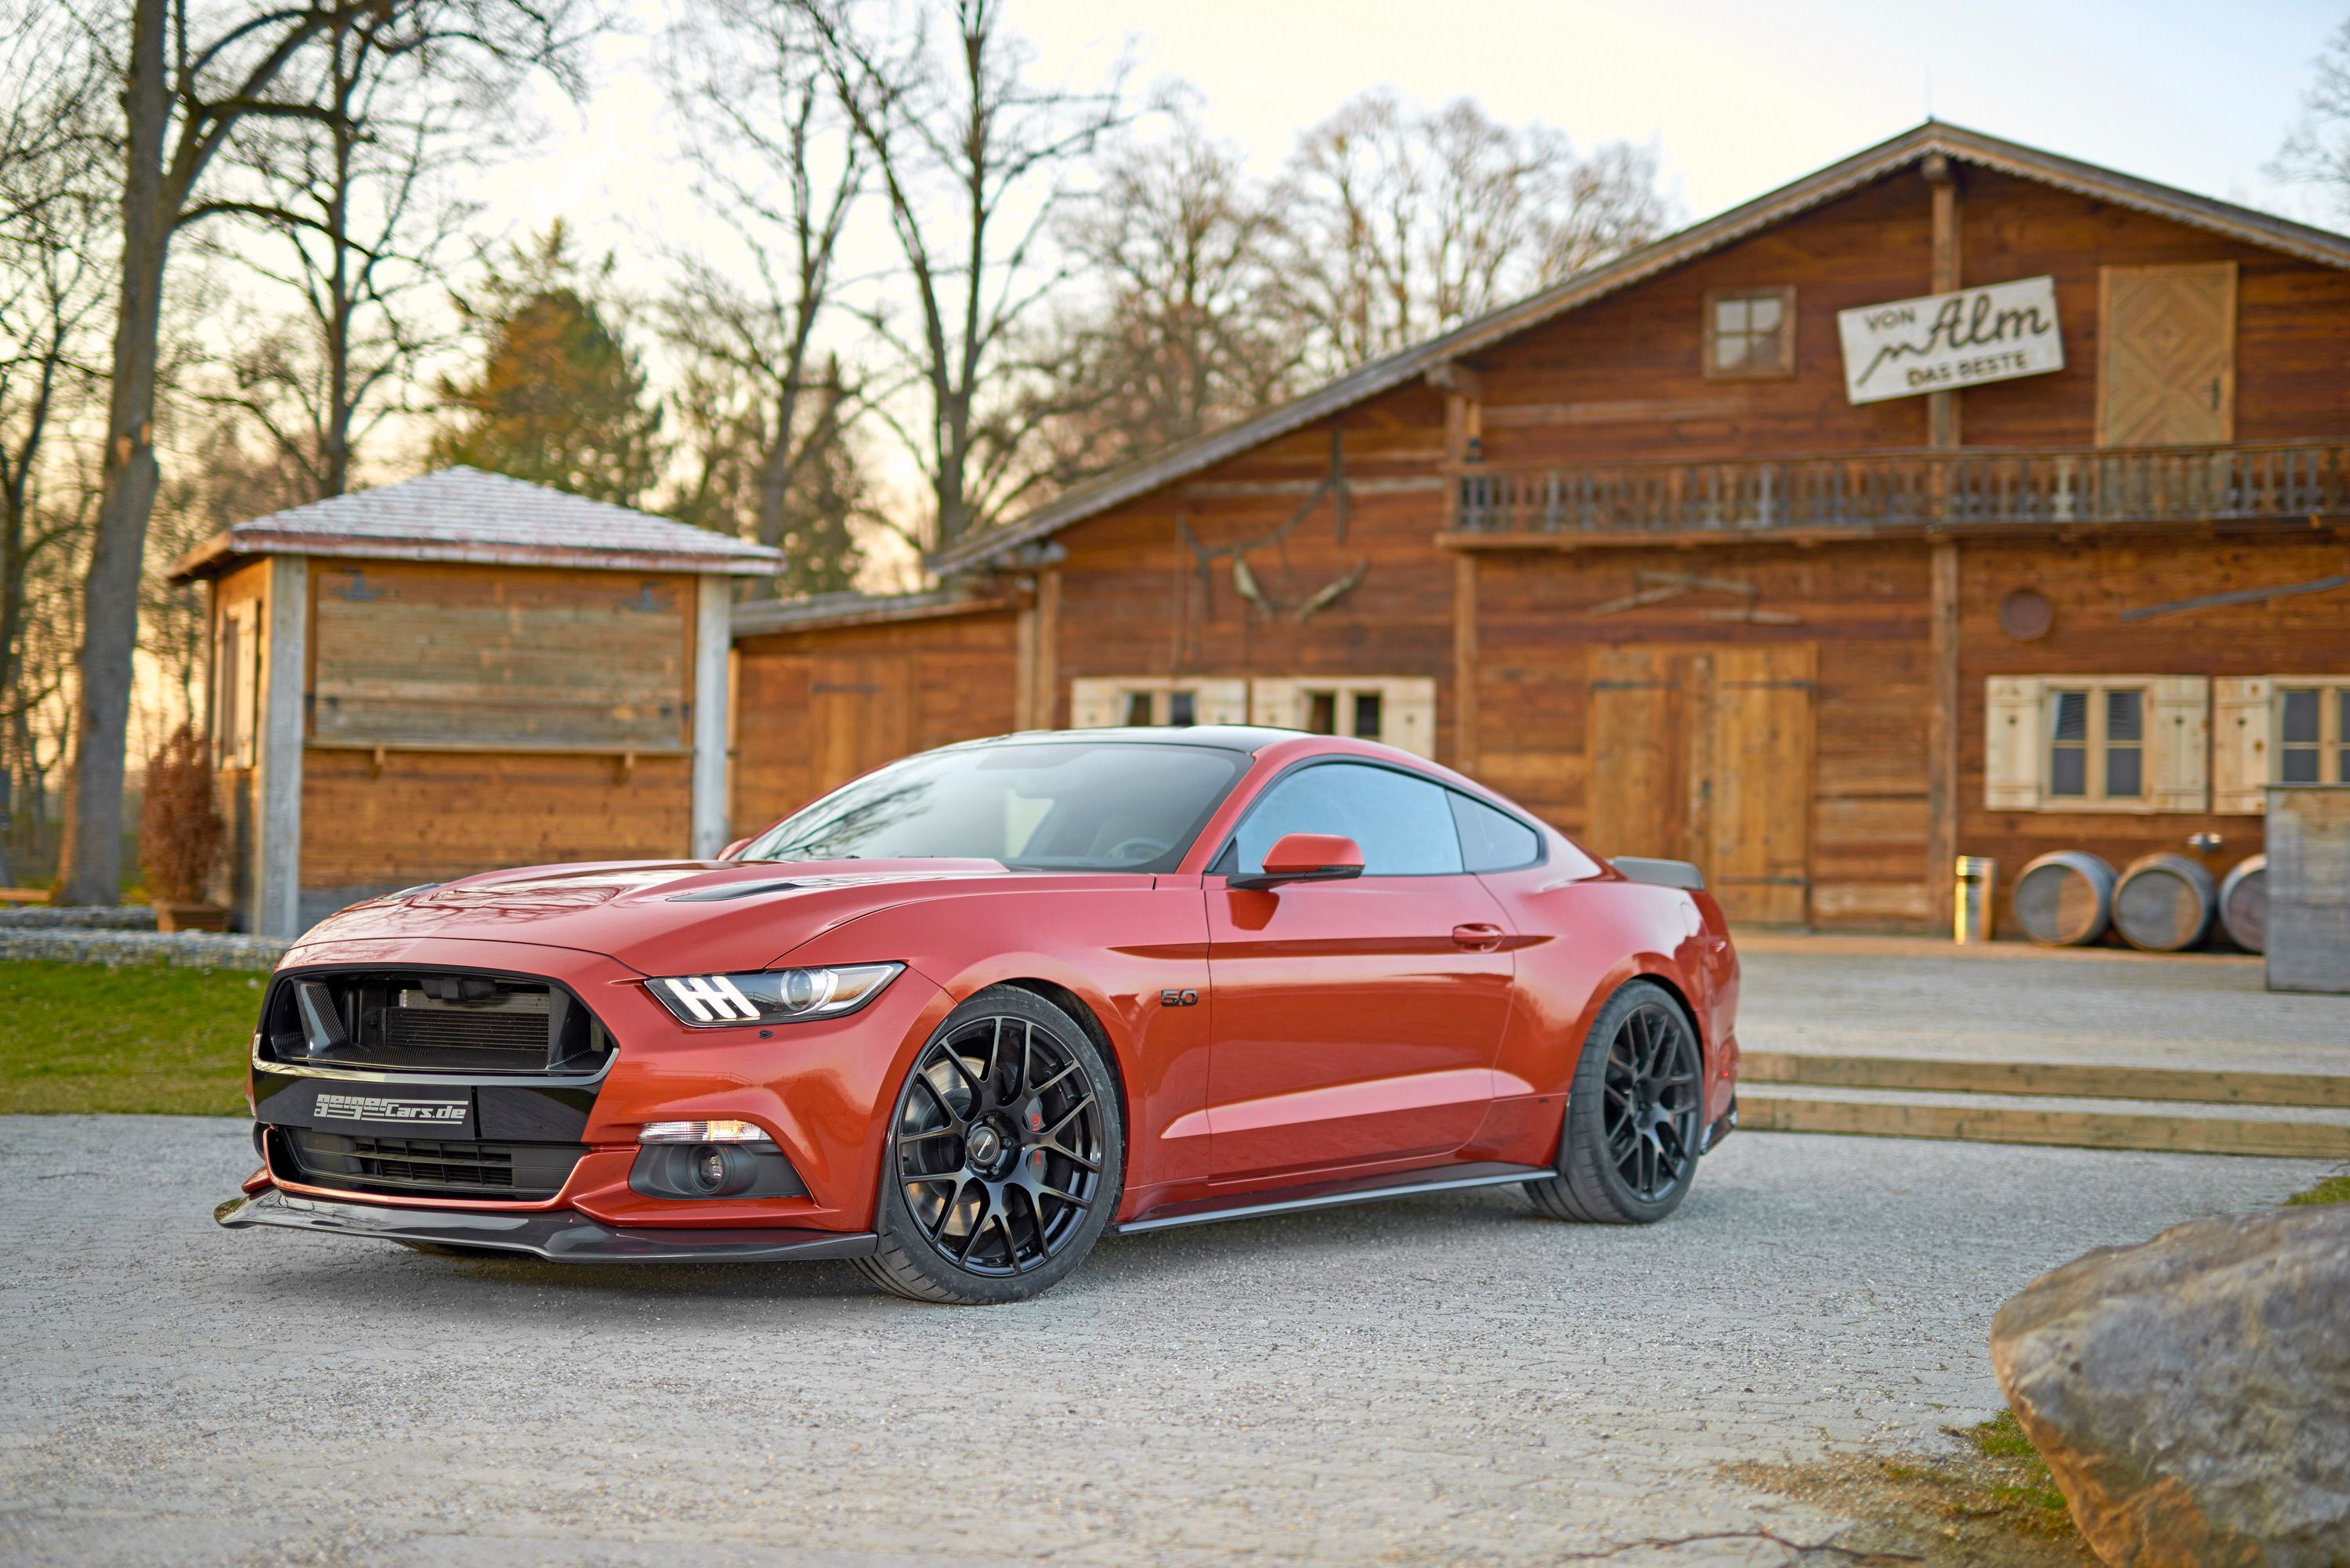 2016 Ford Mustang GT 820 By Geiger Cars